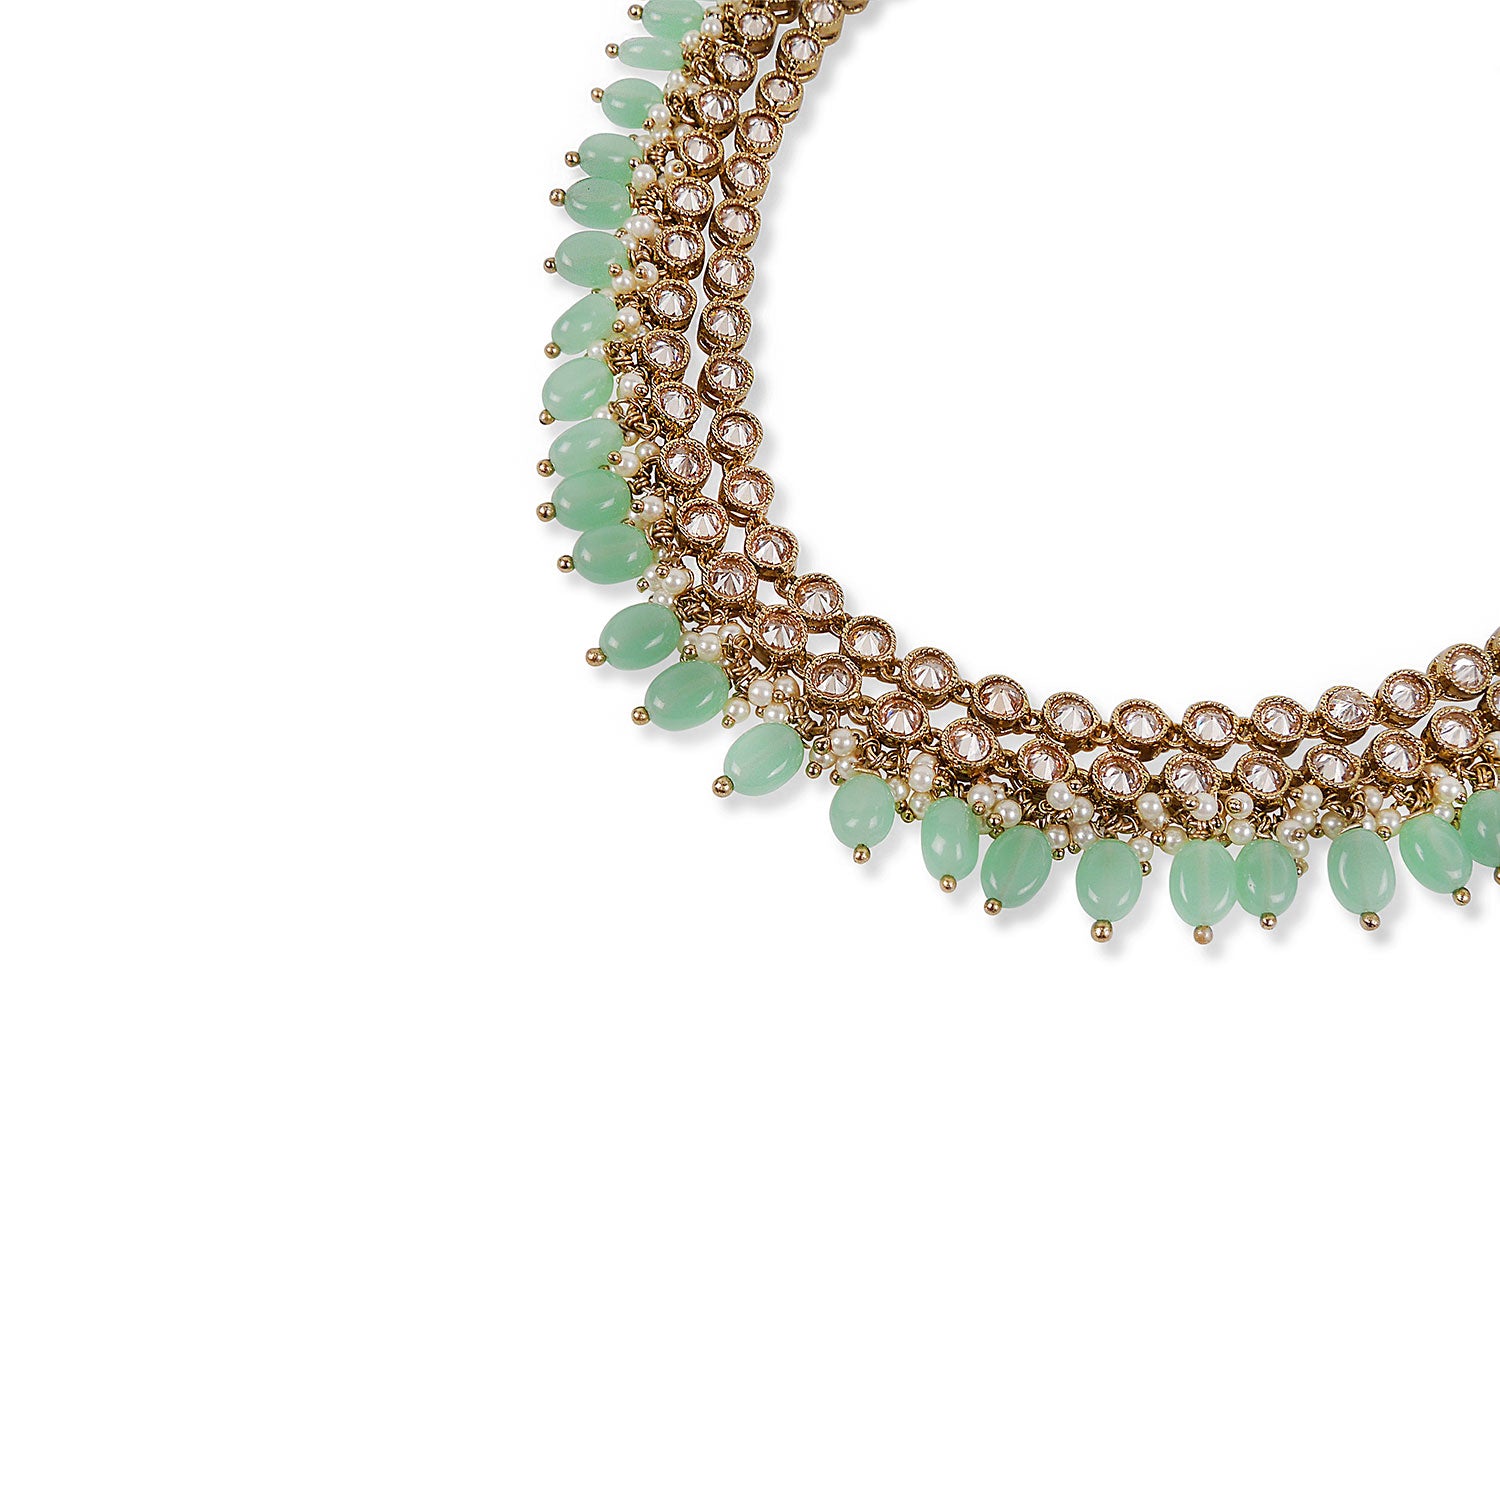 Freena Necklace in Mint